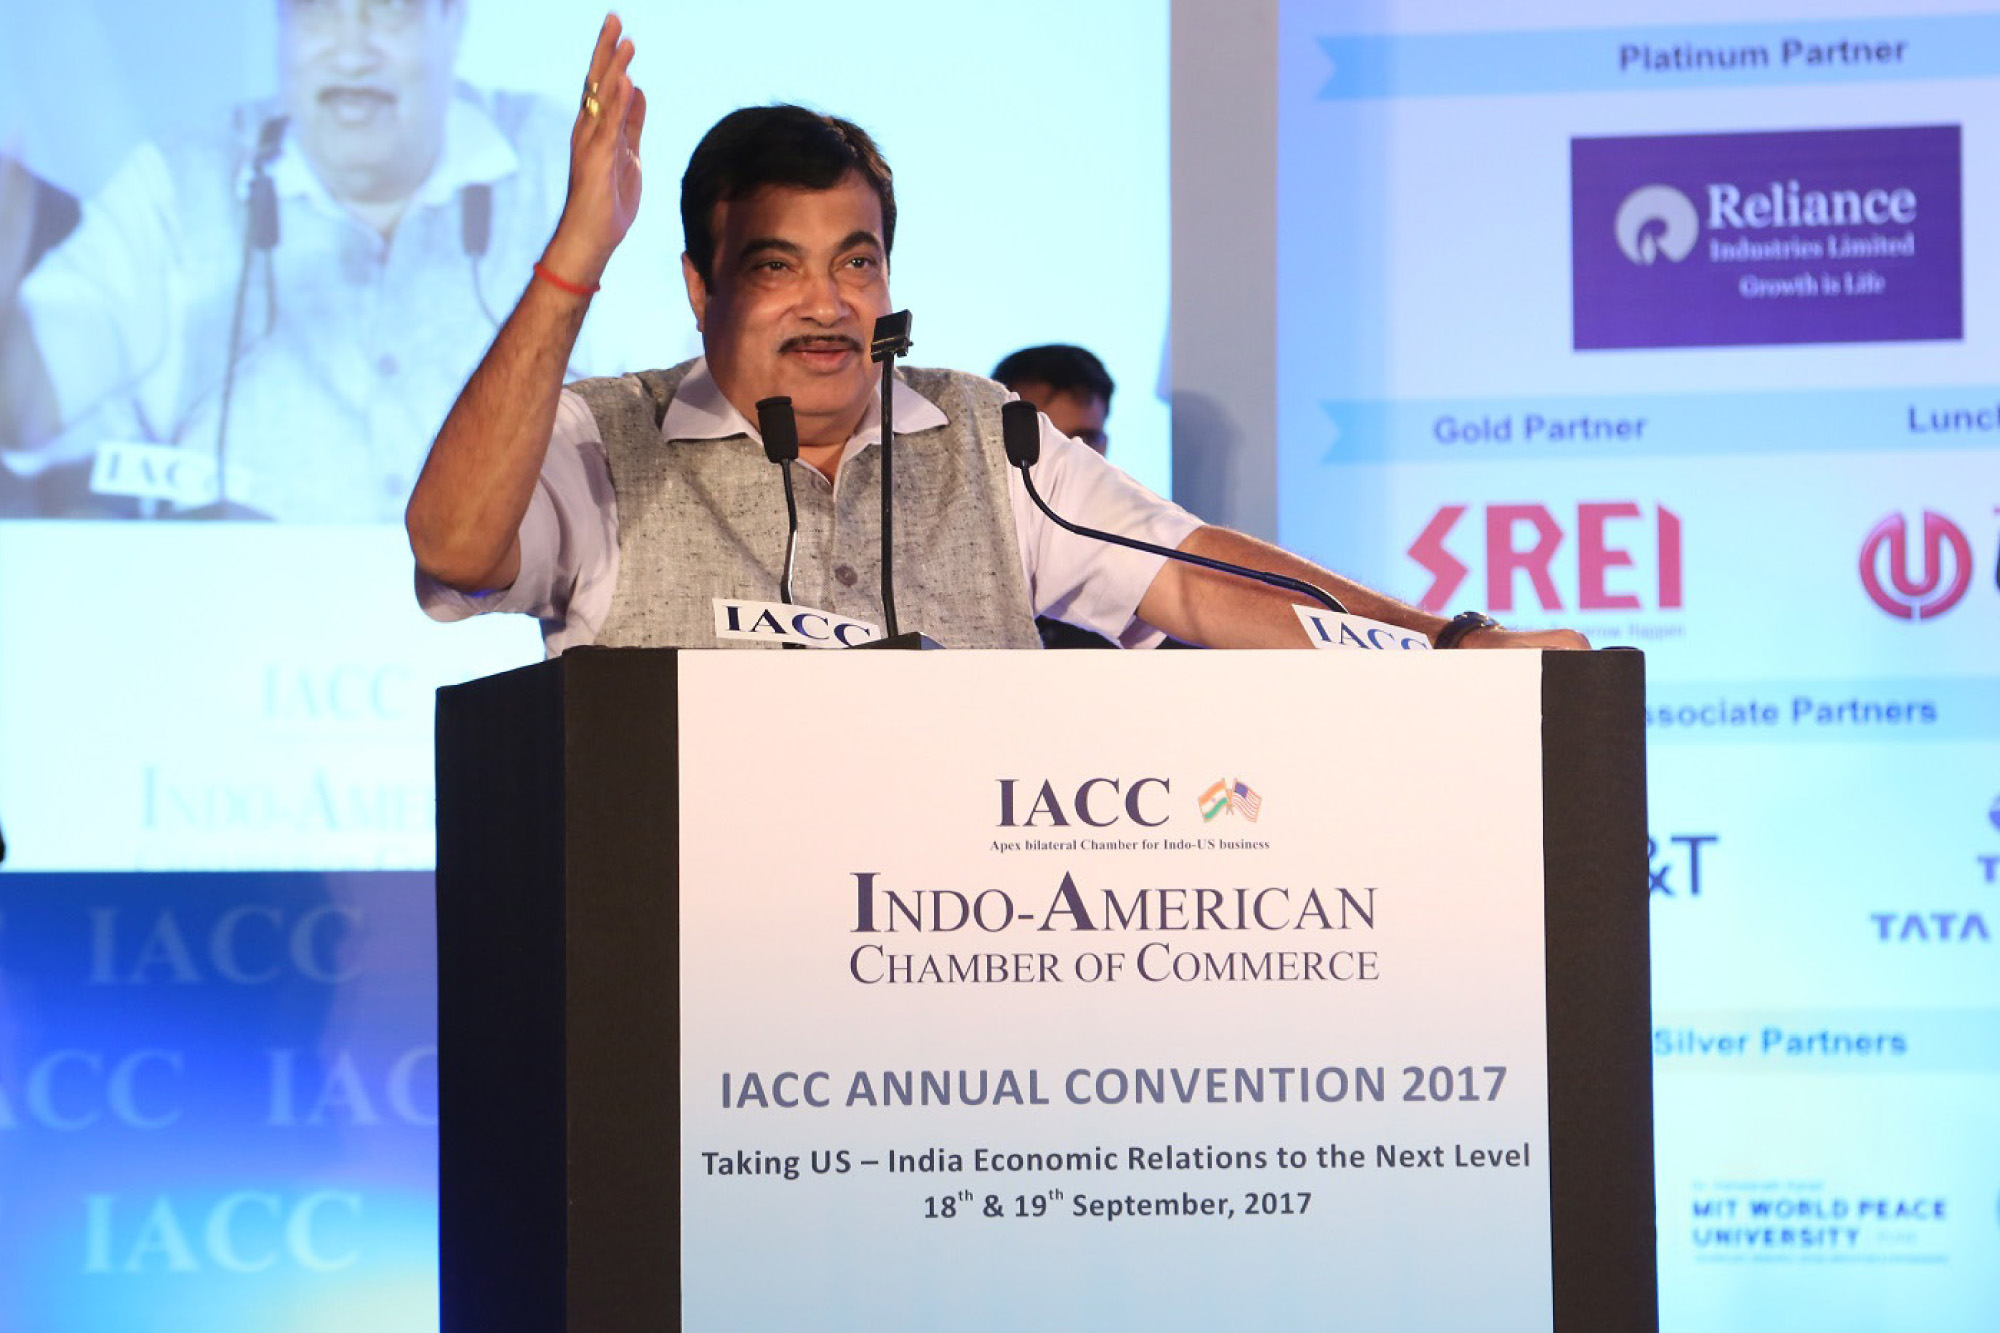 Govt saved Rs 3 lakh crore loans to road sector turning into NPAs: Gadkari